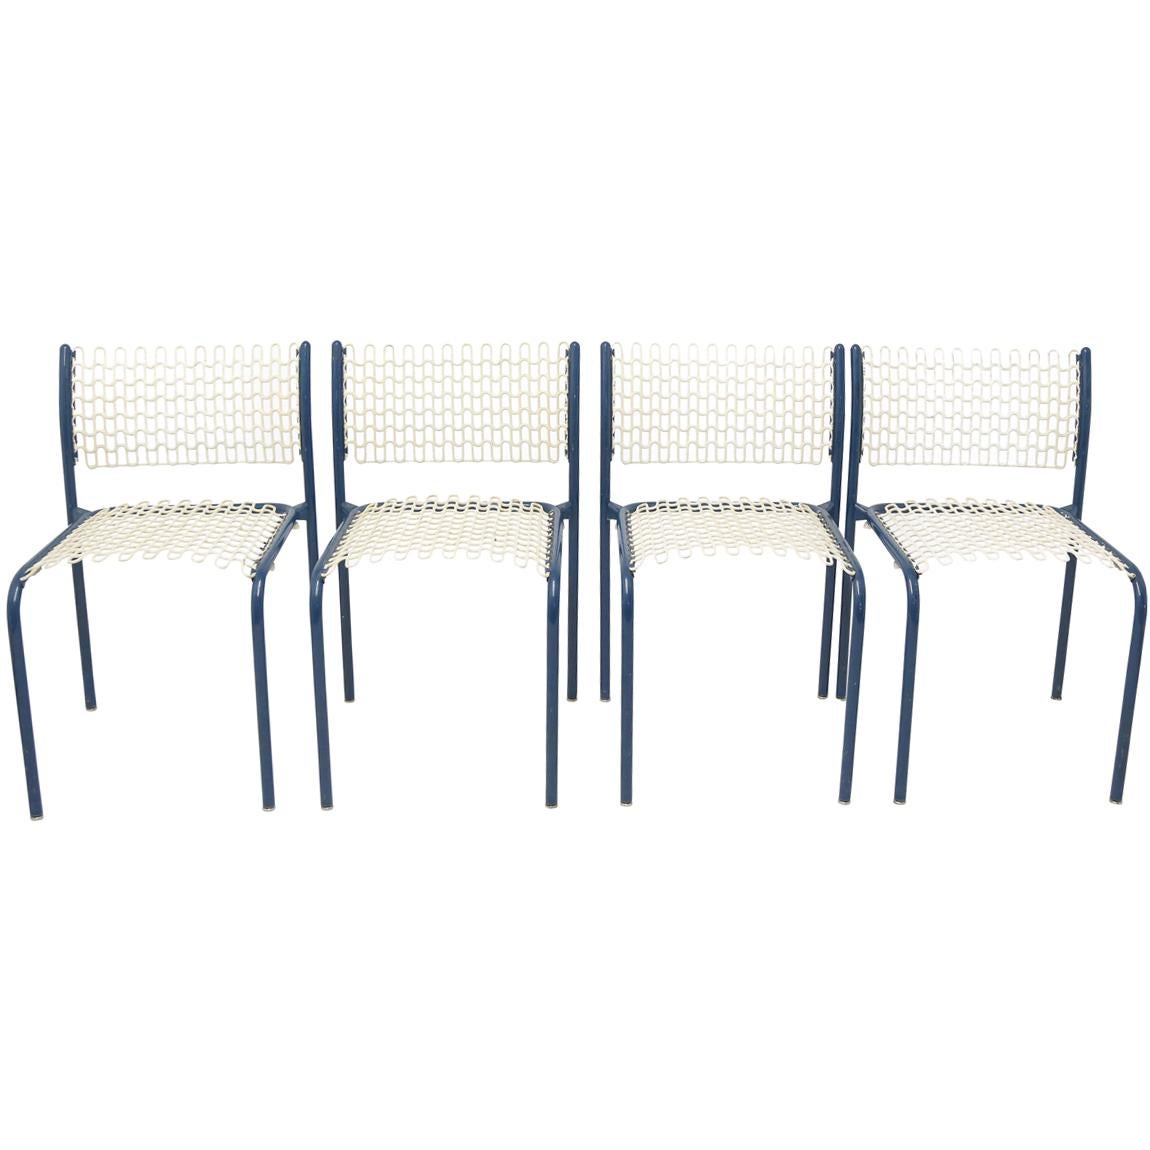 Set of four modernist indoor/outdoor blue metal framed chairs with cream mesh metal PVC coated seats and backs.